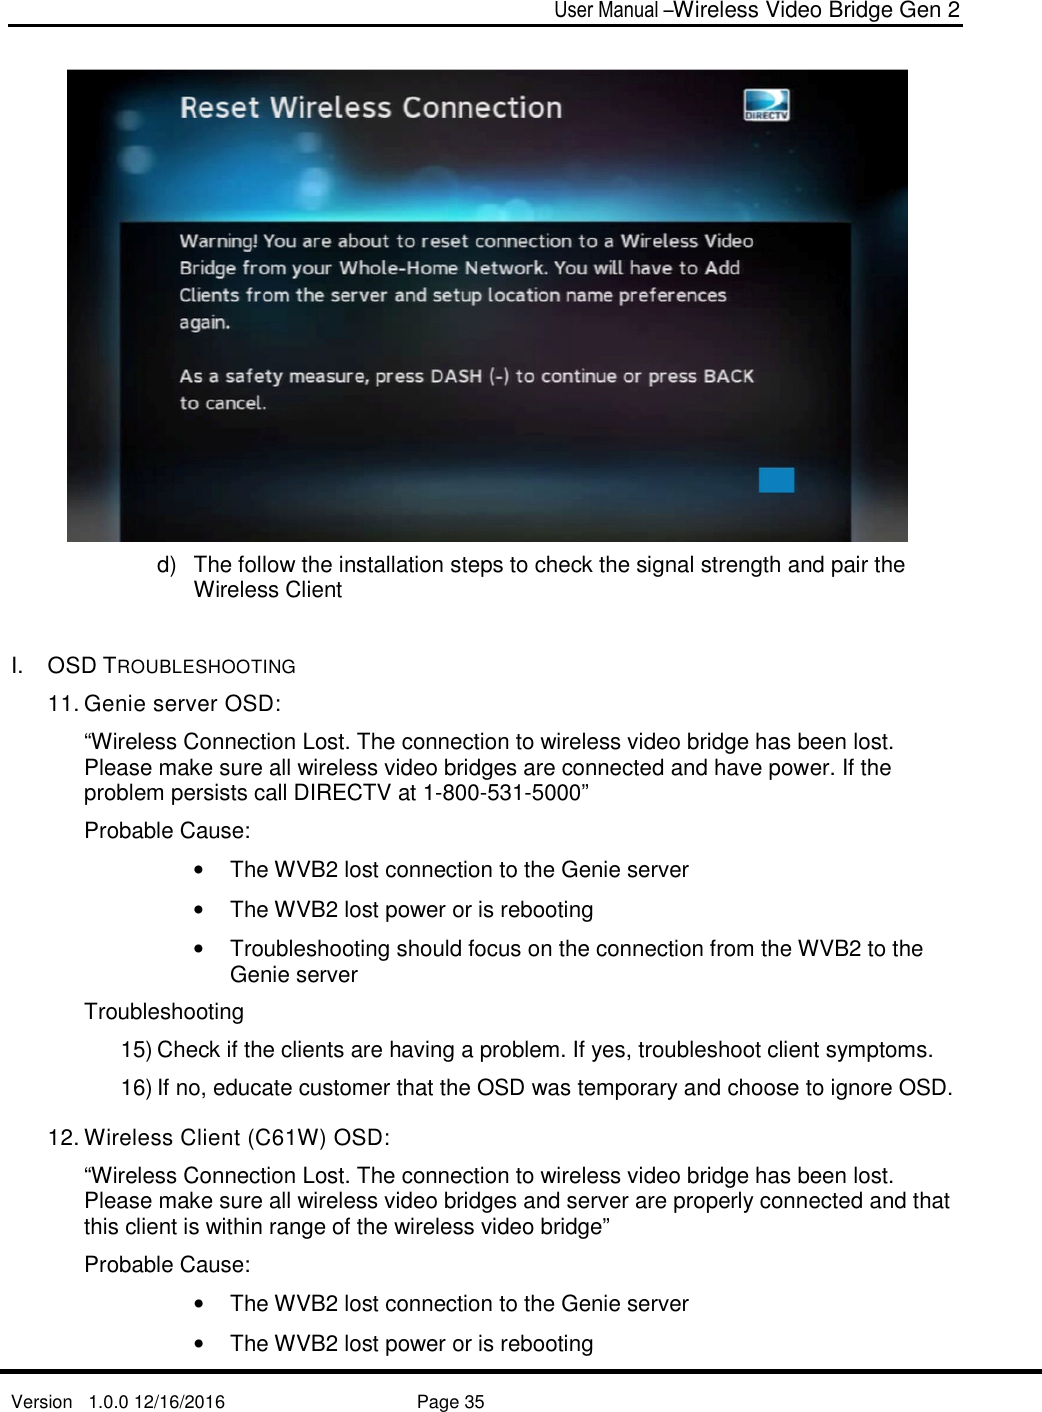  User Manual –Wireless Video Bridge Gen 2  Version   1.0.0 12/16/2016     Page 35    d)  The follow the installation steps to check the signal strength and pair the Wireless Client   I.  OSD TROUBLESHOOTING 11. Genie server OSD:  “Wireless Connection Lost. The connection to wireless video bridge has been lost. Please make sure all wireless video bridges are connected and have power. If the problem persists call DIRECTV at 1-800-531-5000” Probable Cause: •  The WVB2 lost connection to the Genie server •  The WVB2 lost power or is rebooting •  Troubleshooting should focus on the connection from the WVB2 to the Genie server Troubleshooting 15) Check if the clients are having a problem. If yes, troubleshoot client symptoms. 16) If no, educate customer that the OSD was temporary and choose to ignore OSD. 12. Wireless Client (C61W) OSD: “Wireless Connection Lost. The connection to wireless video bridge has been lost. Please make sure all wireless video bridges and server are properly connected and that this client is within range of the wireless video bridge” Probable Cause: •  The WVB2 lost connection to the Genie server •  The WVB2 lost power or is rebooting 